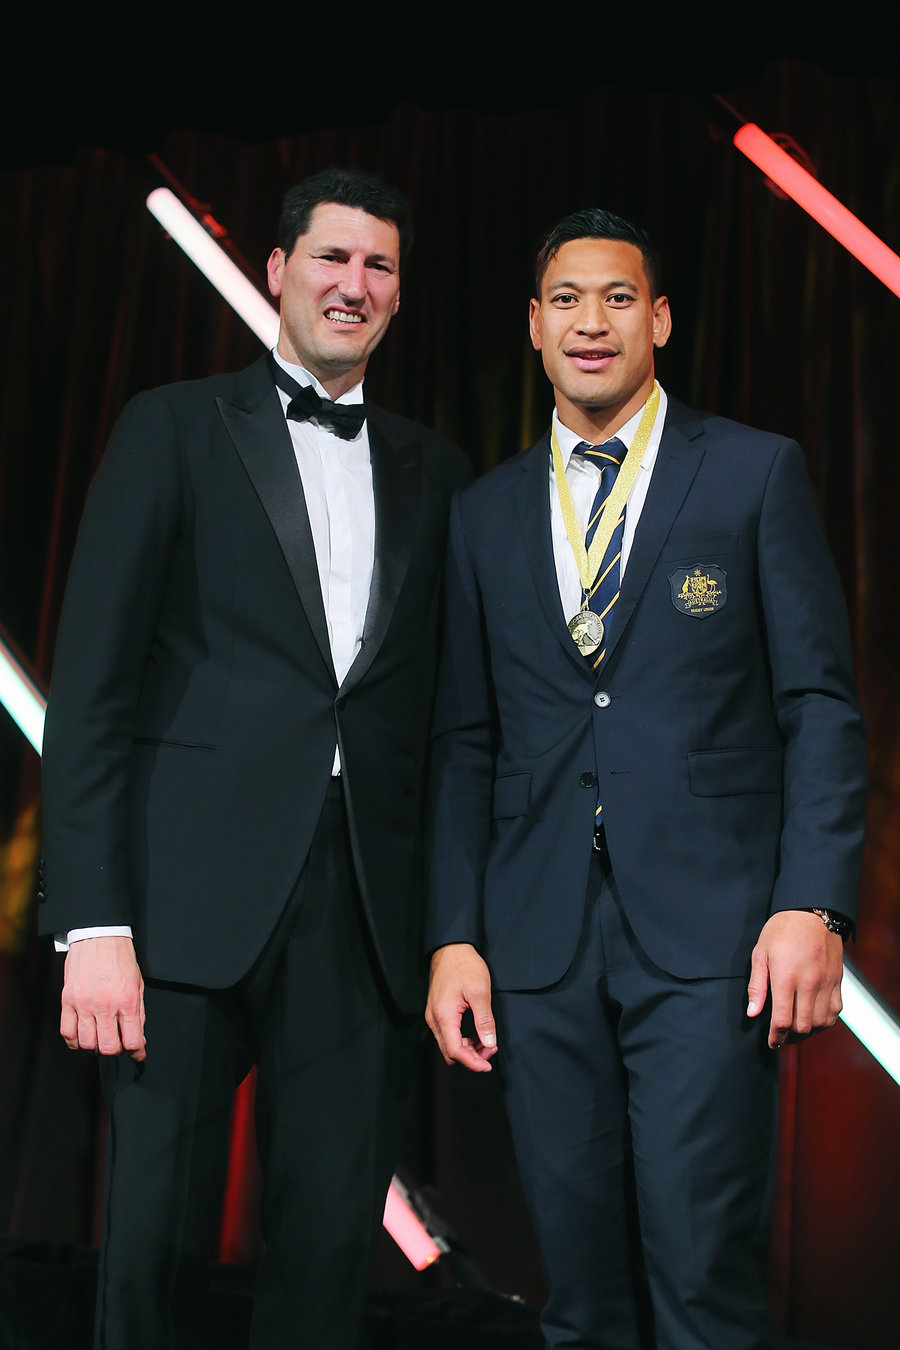 John Eales and Israel Folau pose after Folau is awarded with the John Eales Medal